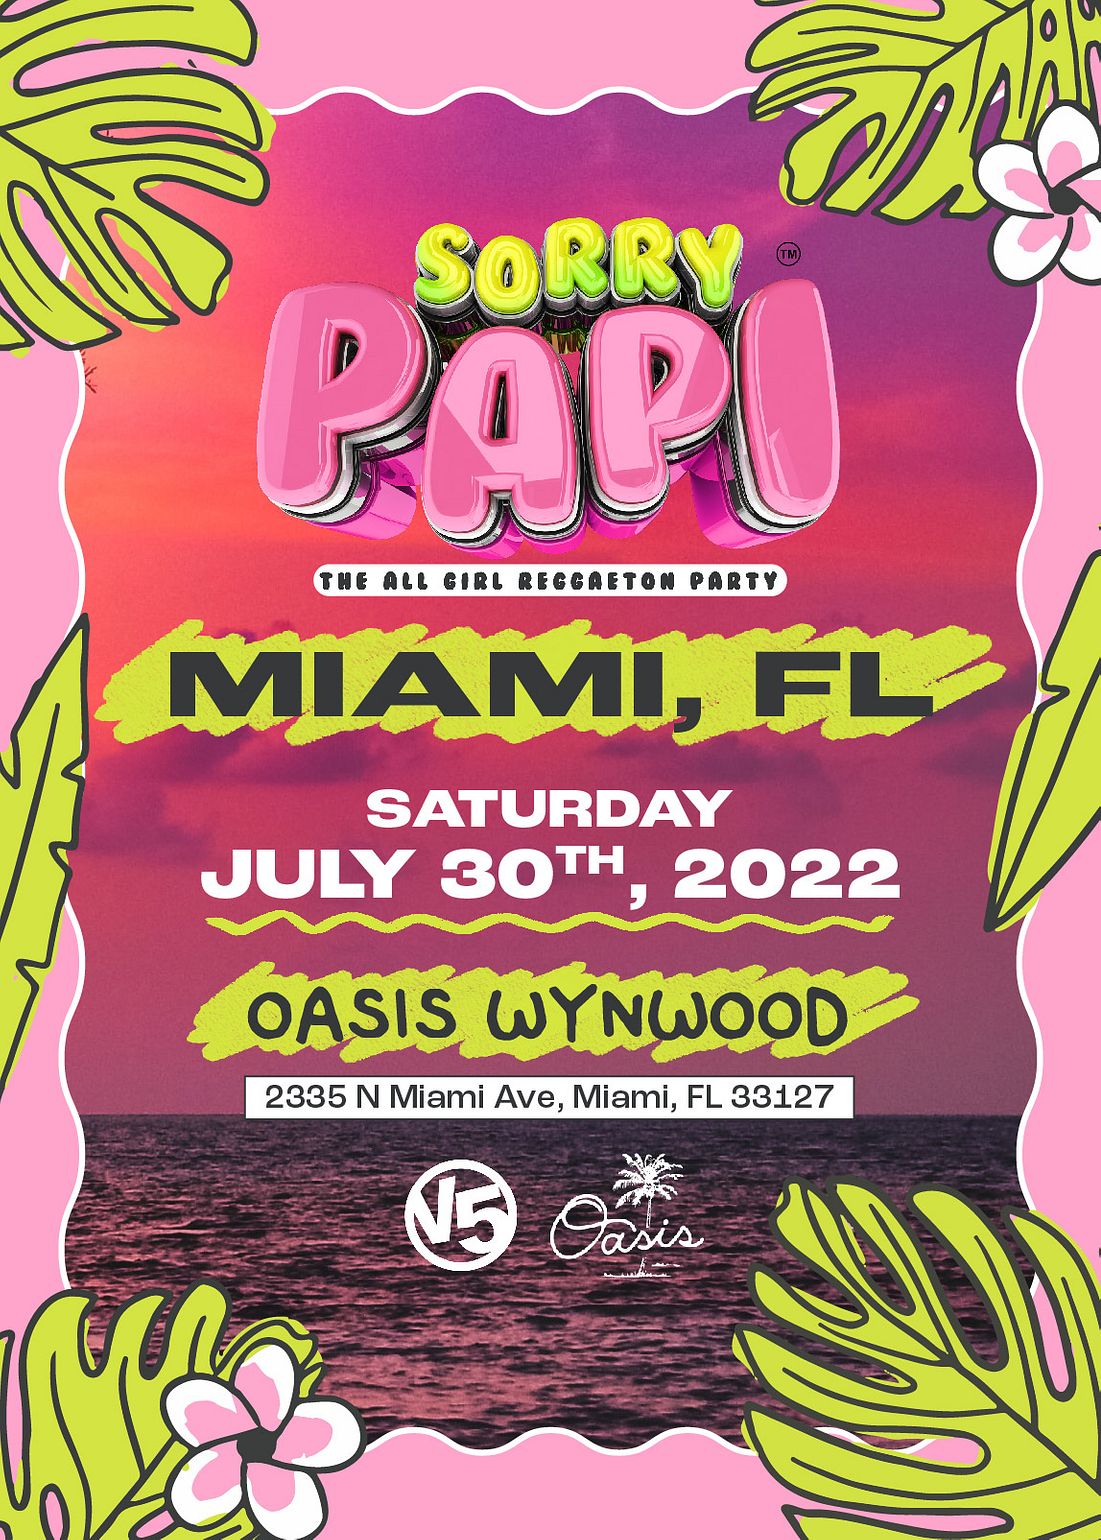 Sorry Papi Tour The All Girl Reggaeton Party Tickets at Oasis Wynwood